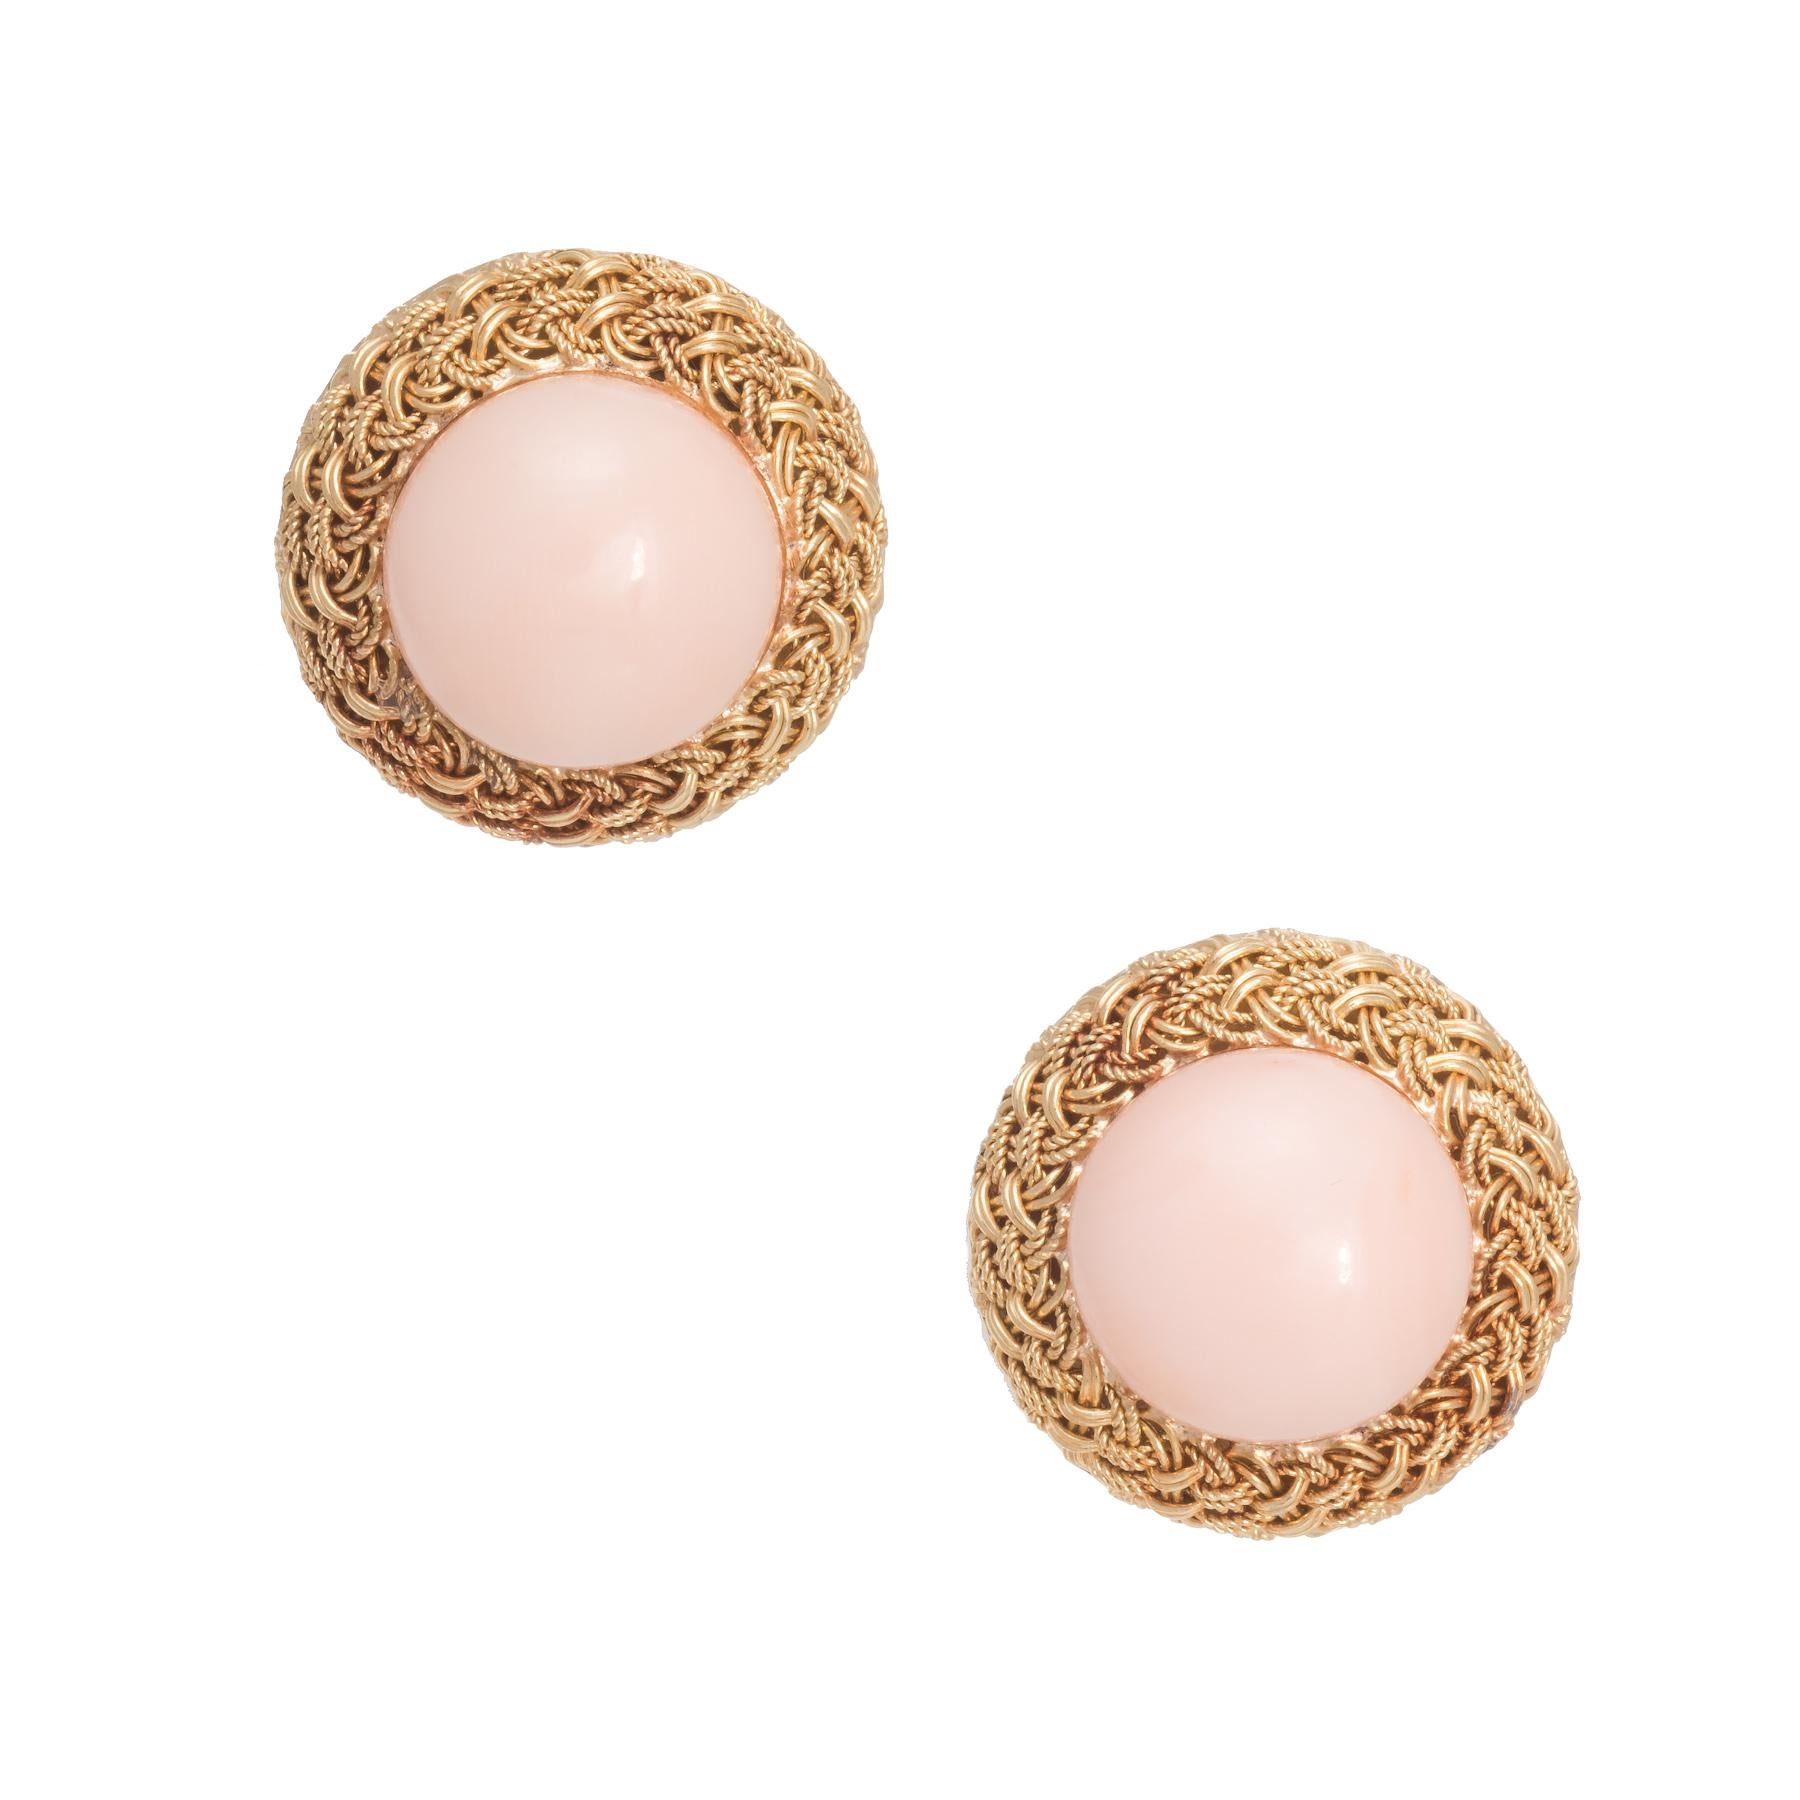 Modern Angel Skin Coral Round Earrings Vintage 18 Karat Yellow Gold Estate Fine Jewelry For Sale